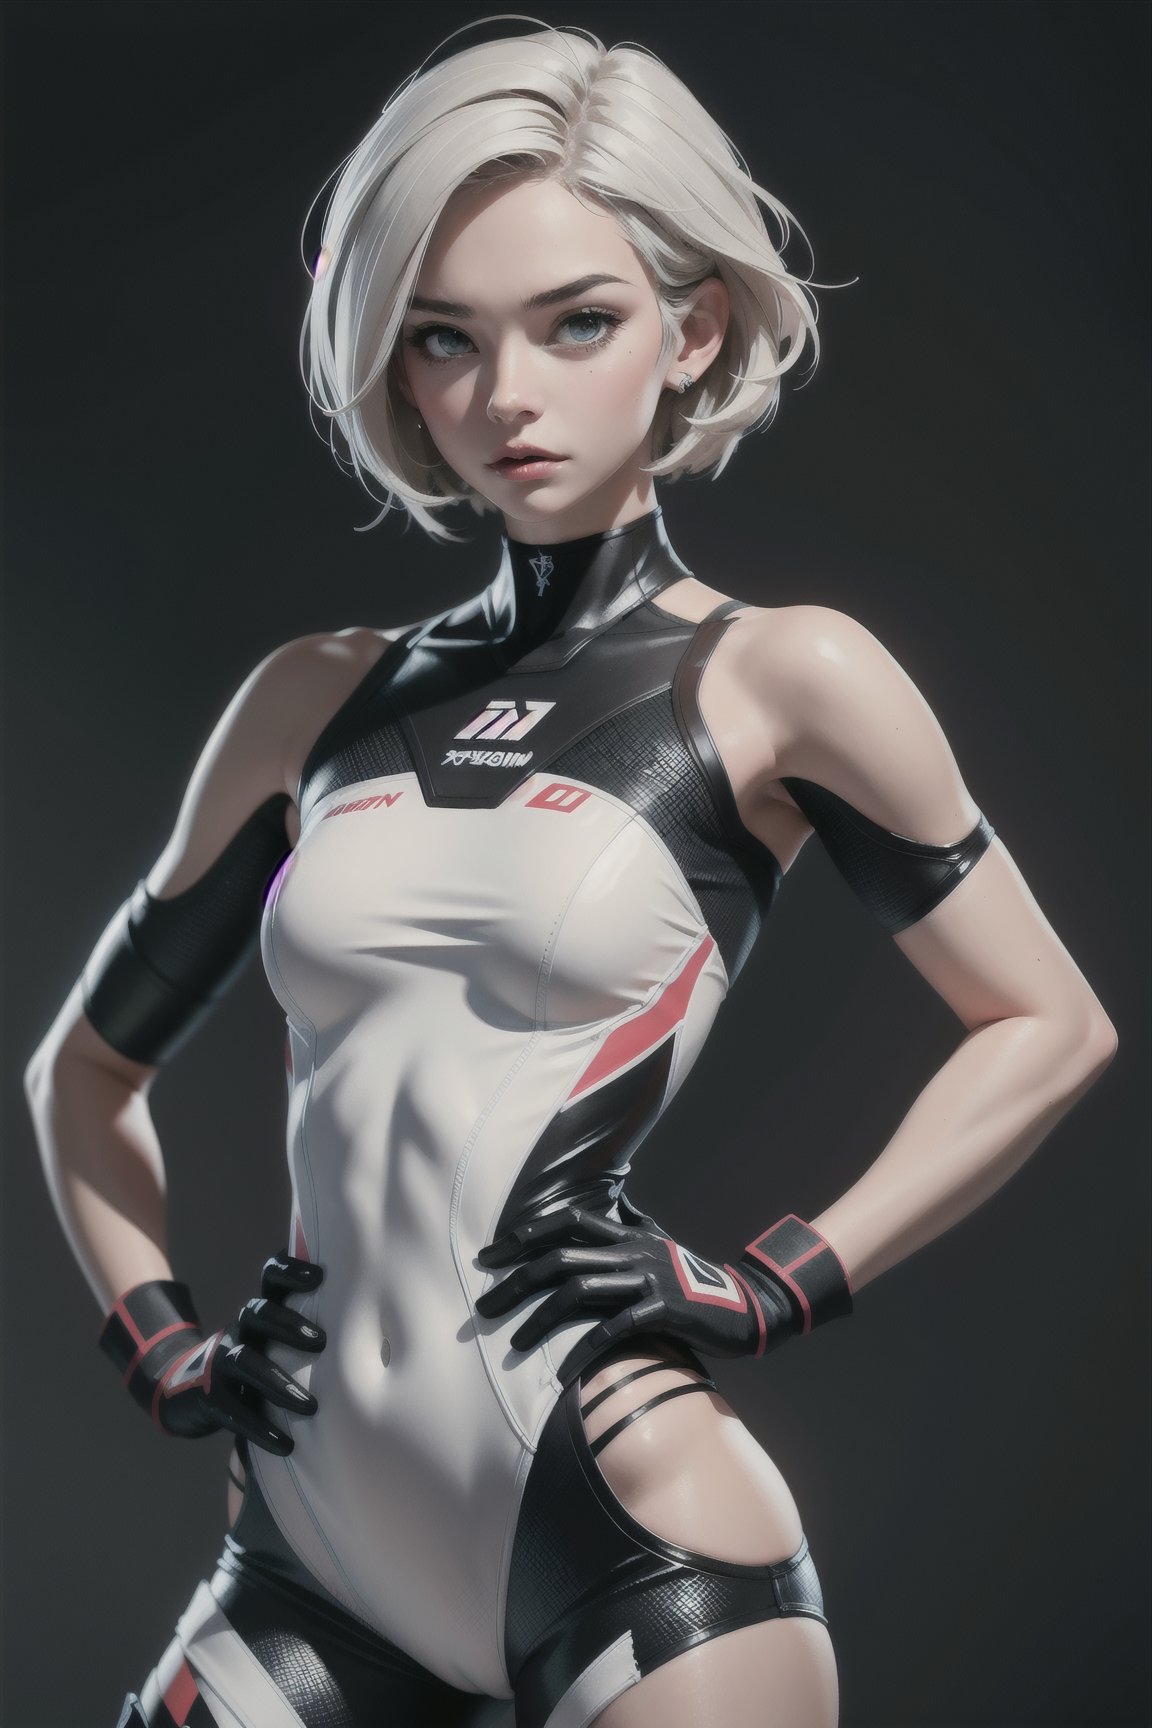 Create a photorealistic image of a woman with Torn dressed Motocross suit. Strapless should have a fit and athletic build,  suggesting that she has short white hair,  hand on her hip. Her expression should convey a sense of determination